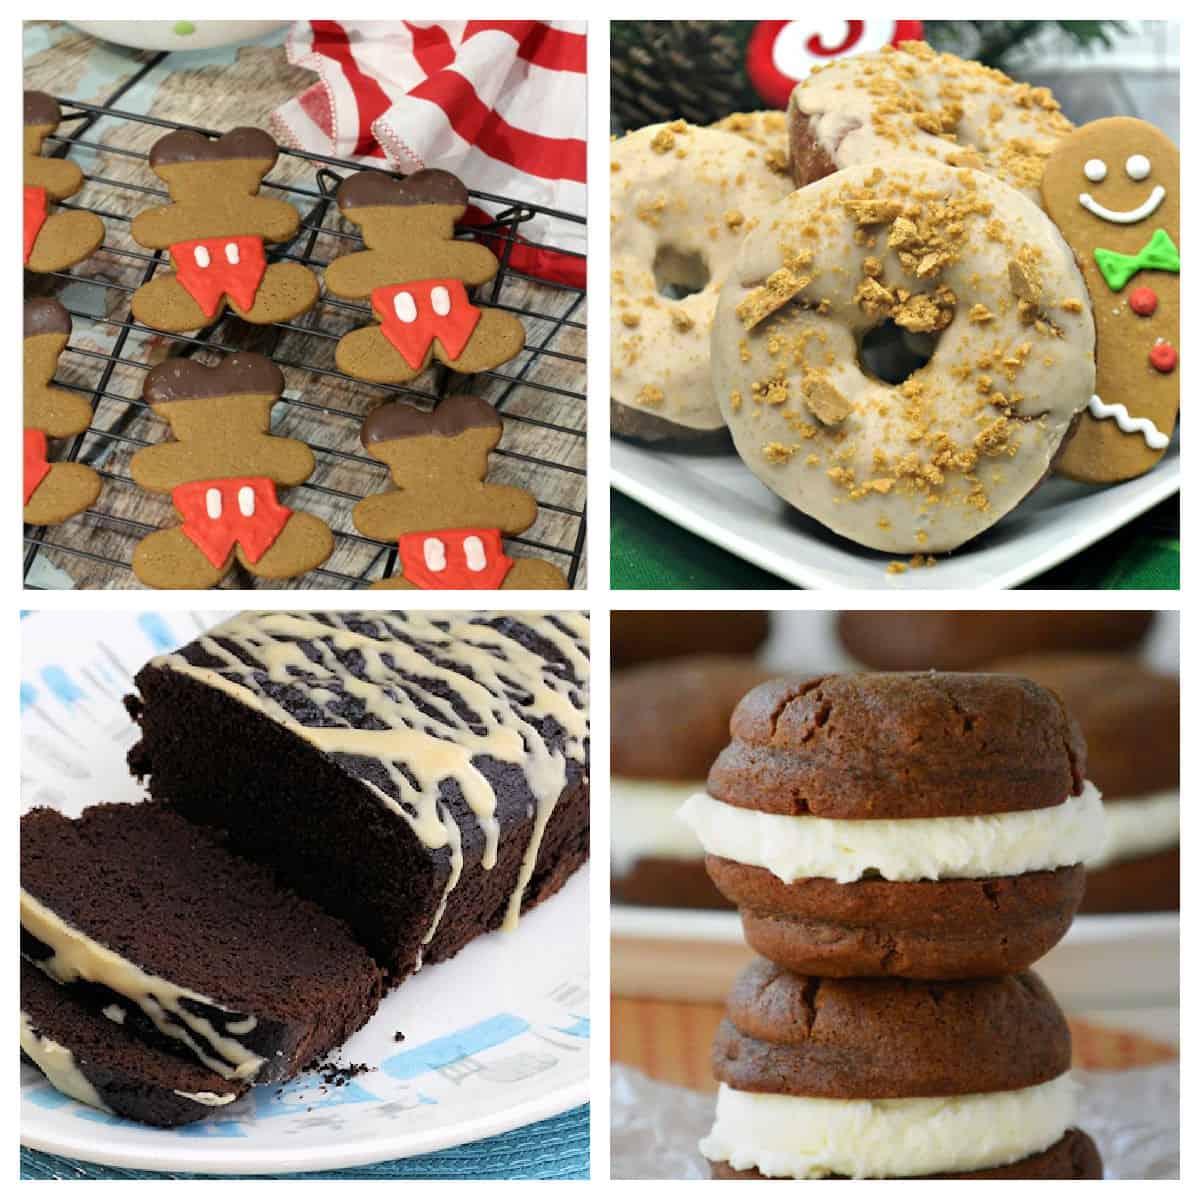 Gingerbread Mickey cookies, gingerbread donuts, gingerbread loaf, and gingerbread sandwich cookies in a collage.